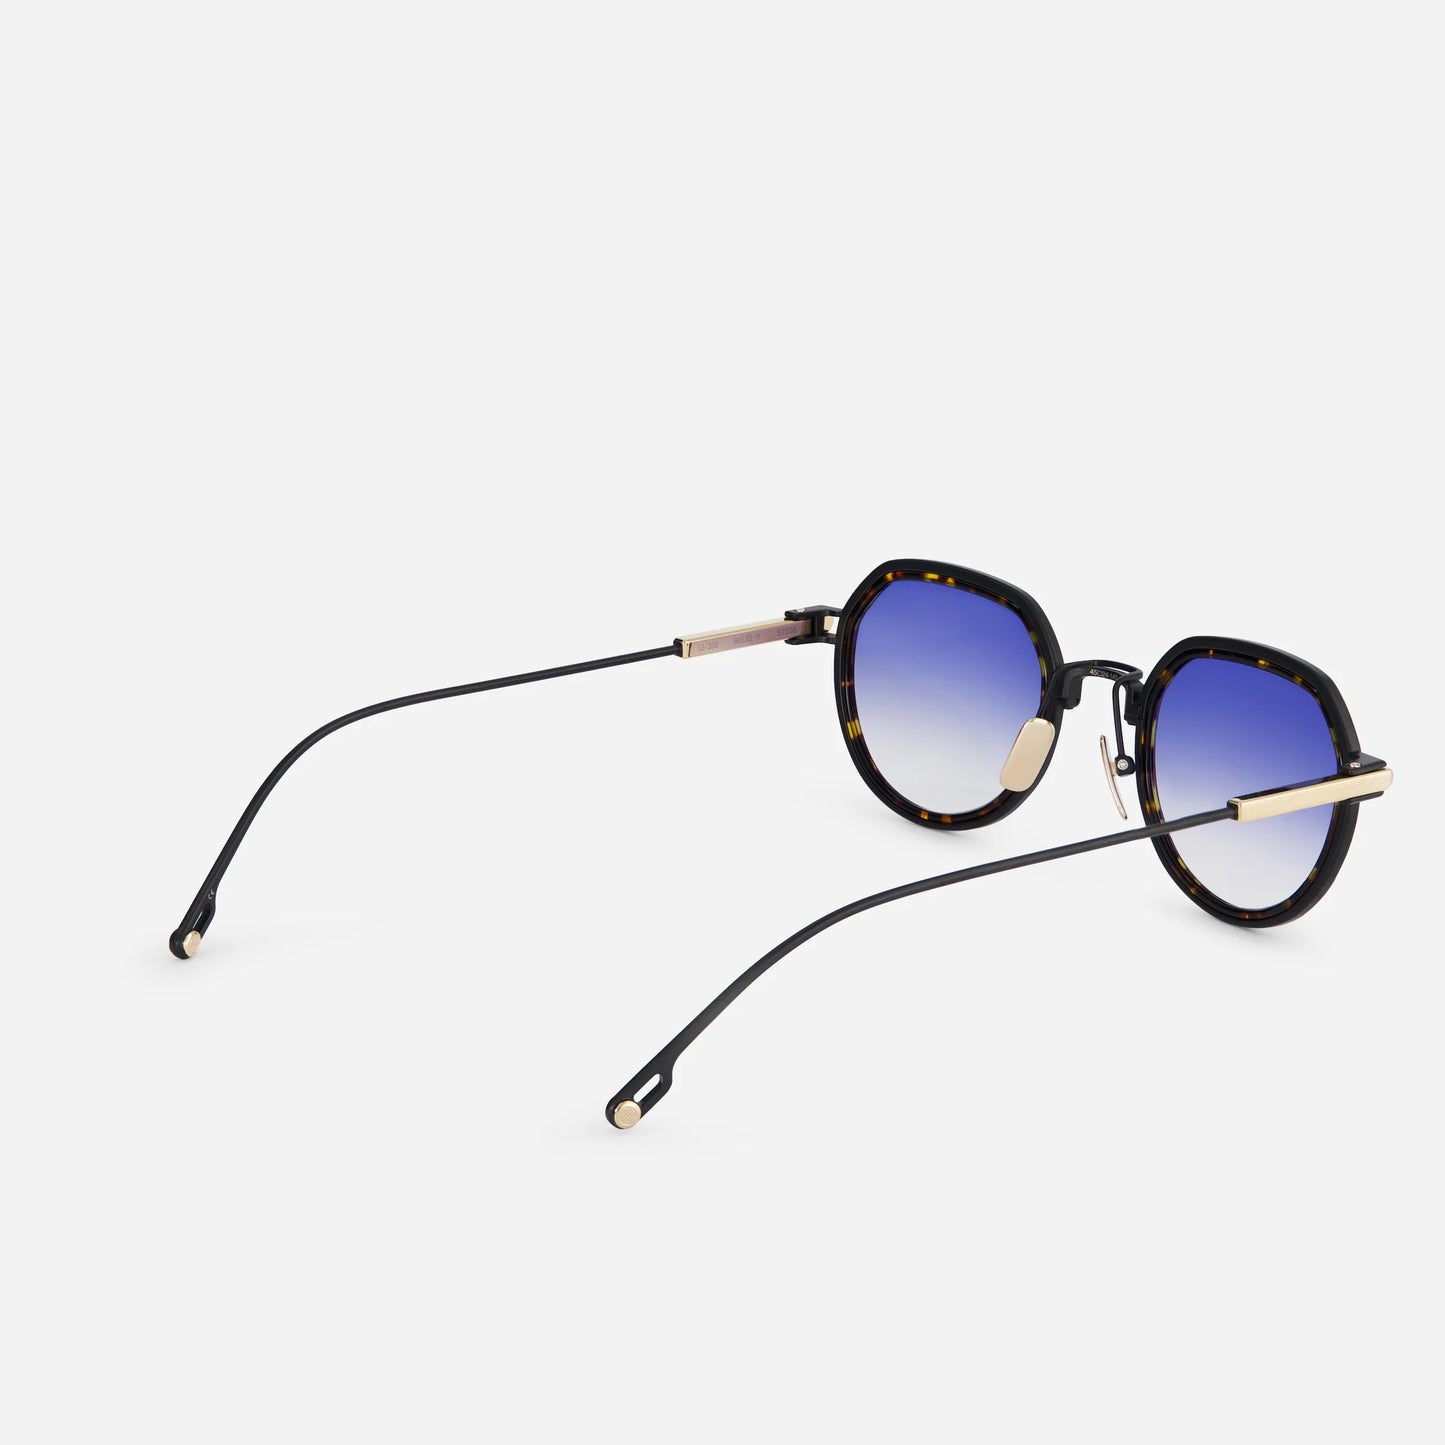 Elevate your look with Belel-T S2206 sunglasses, offering fashionable blue gradient lenses and a classic tortoise insert for a touch of elegance.